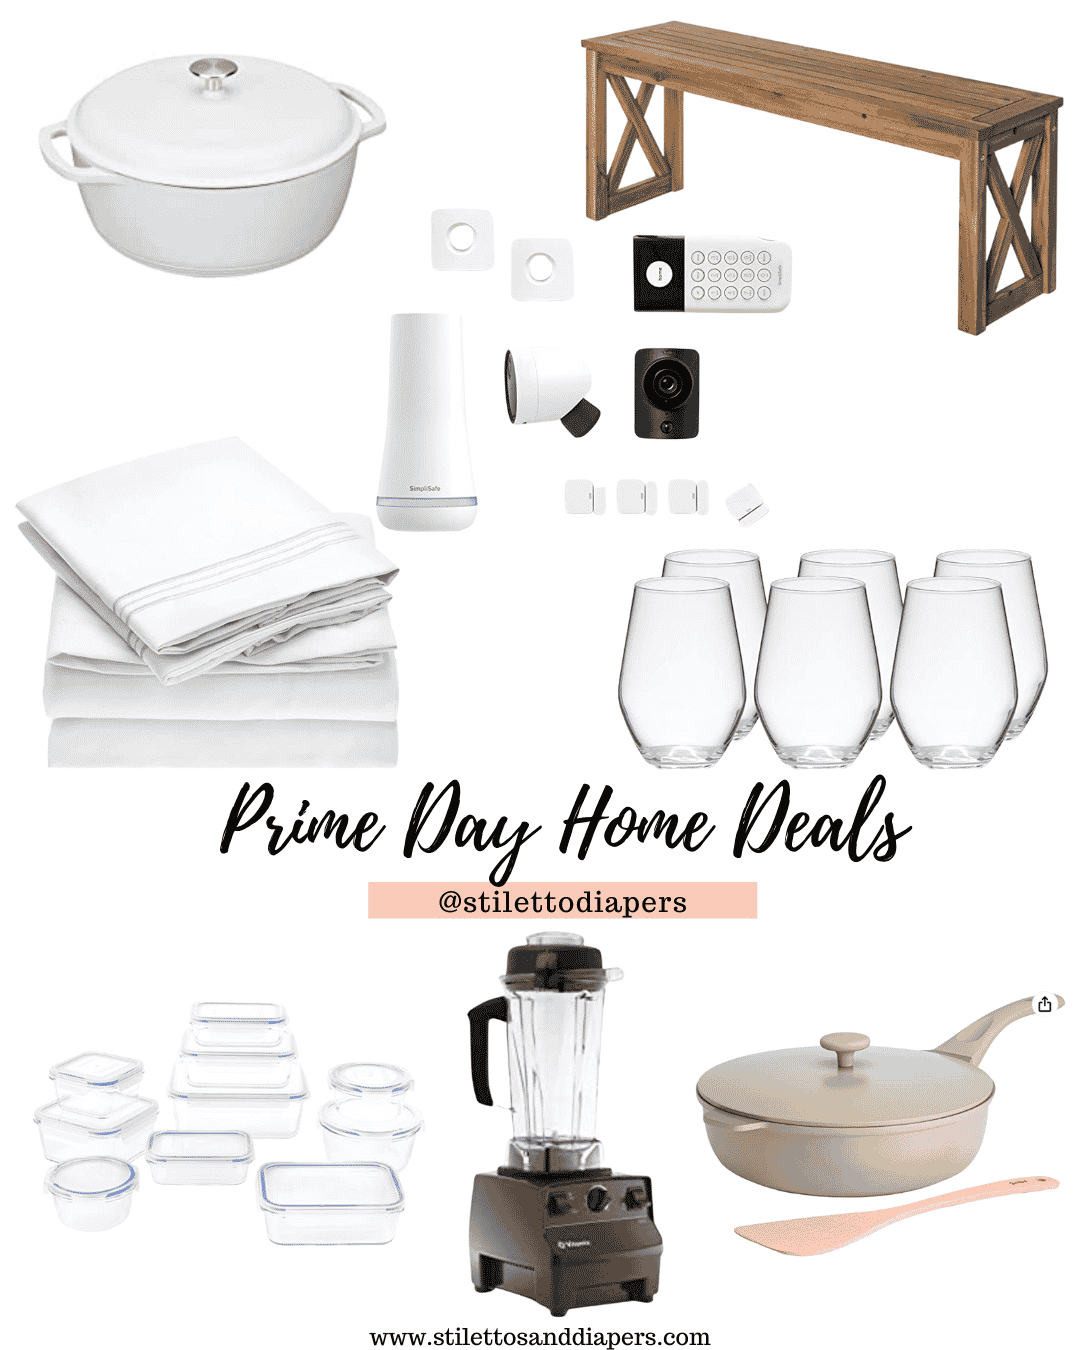 Home Prime Day Dea, Best amazon prime day finds, Stilettos and diapers